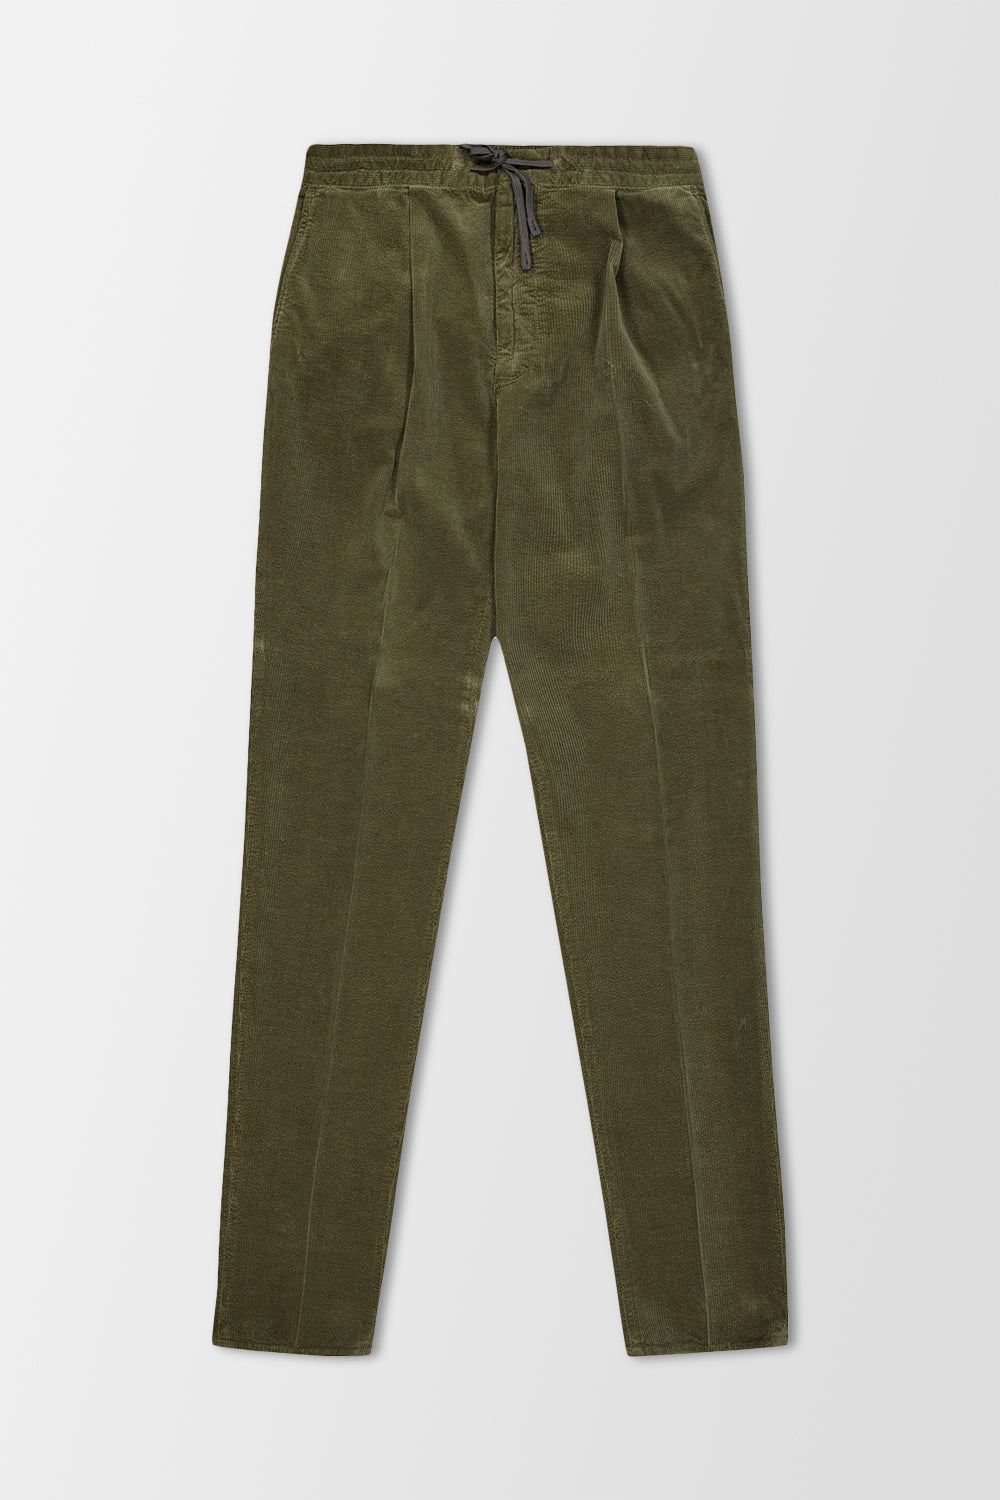 Incotex Olive Casual Trousers